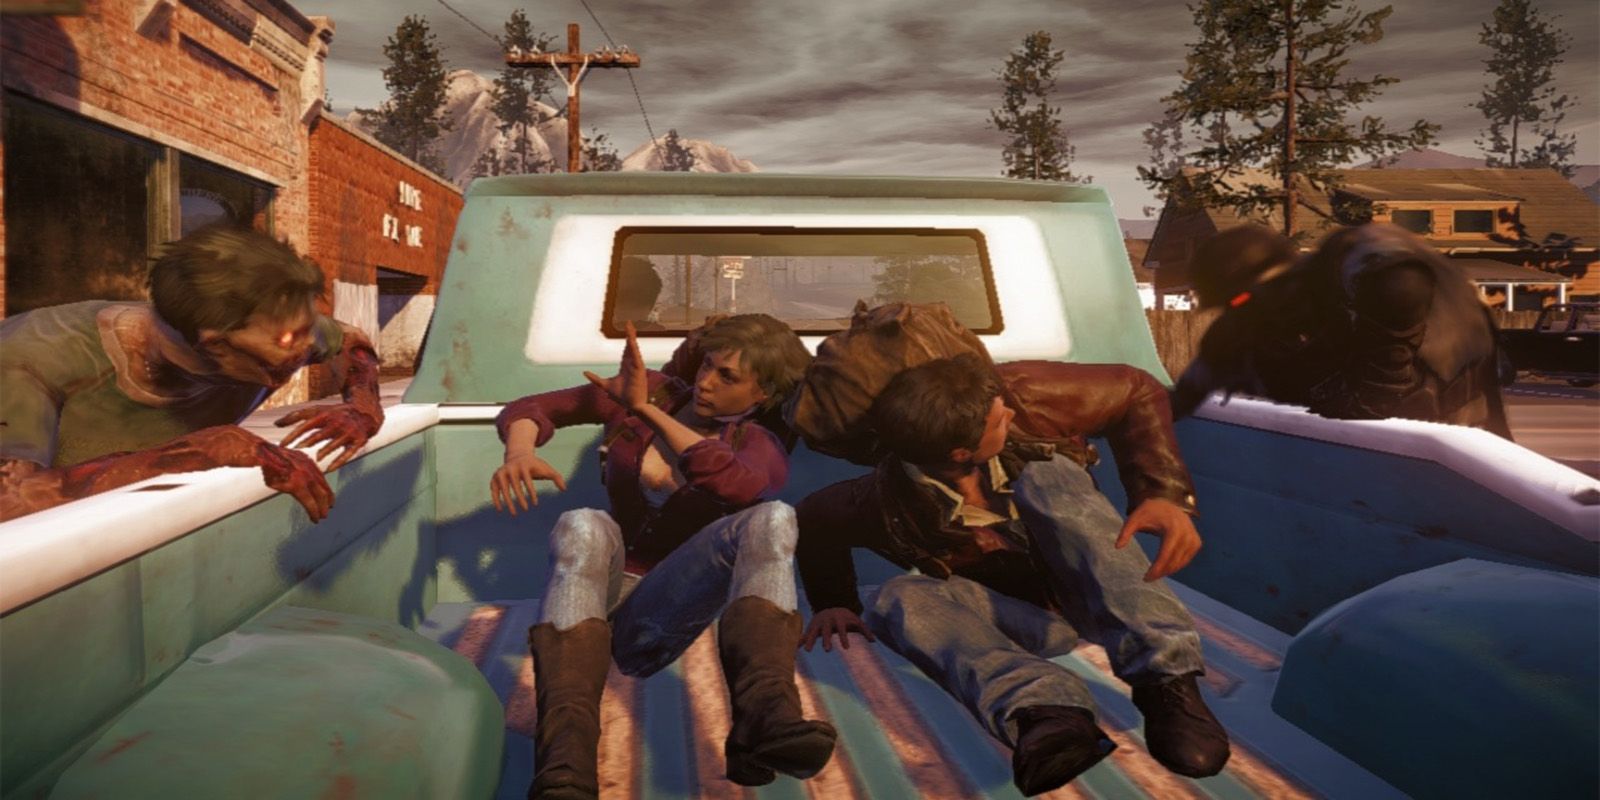 two people in the back of a truck are attacked by zombies